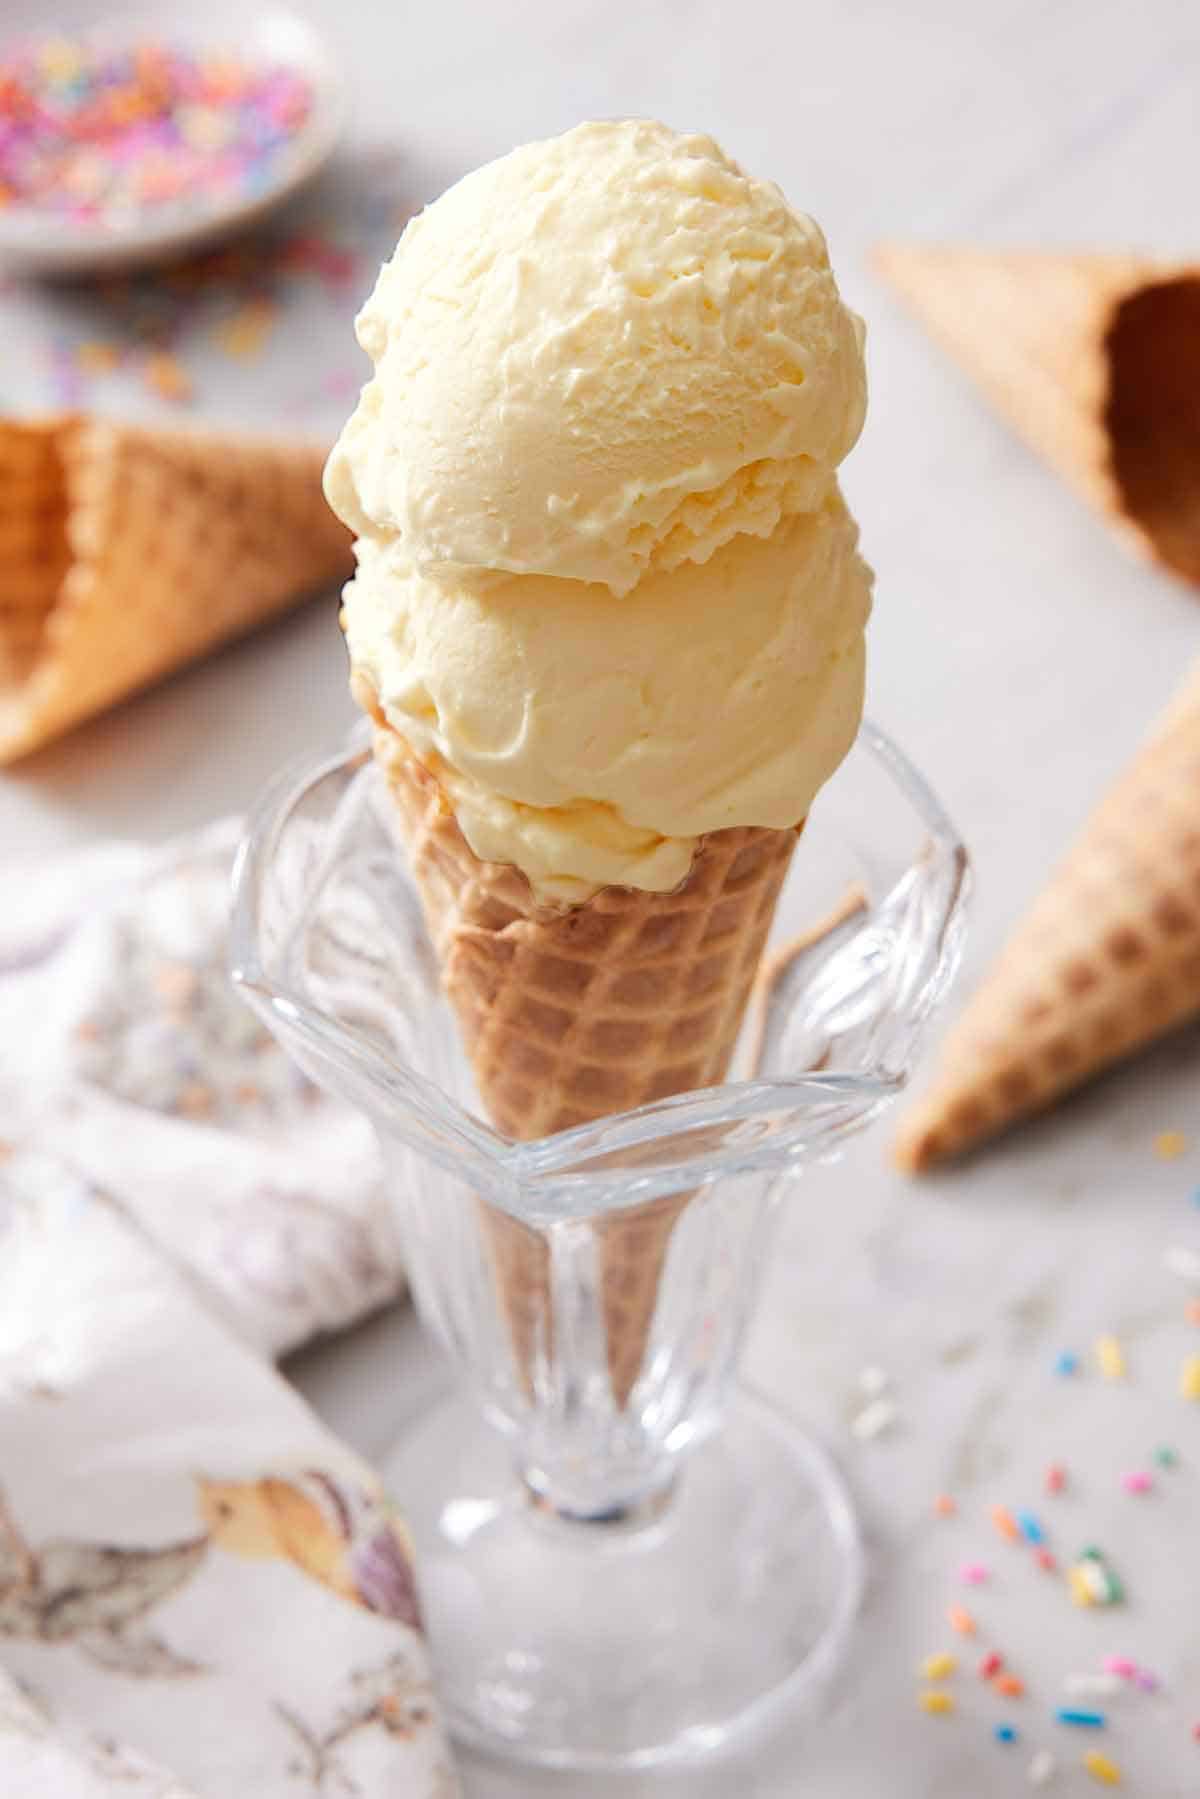 An ice cream cone with two scoops of vanilla ice cream. Cones and sprinkles scattered around.